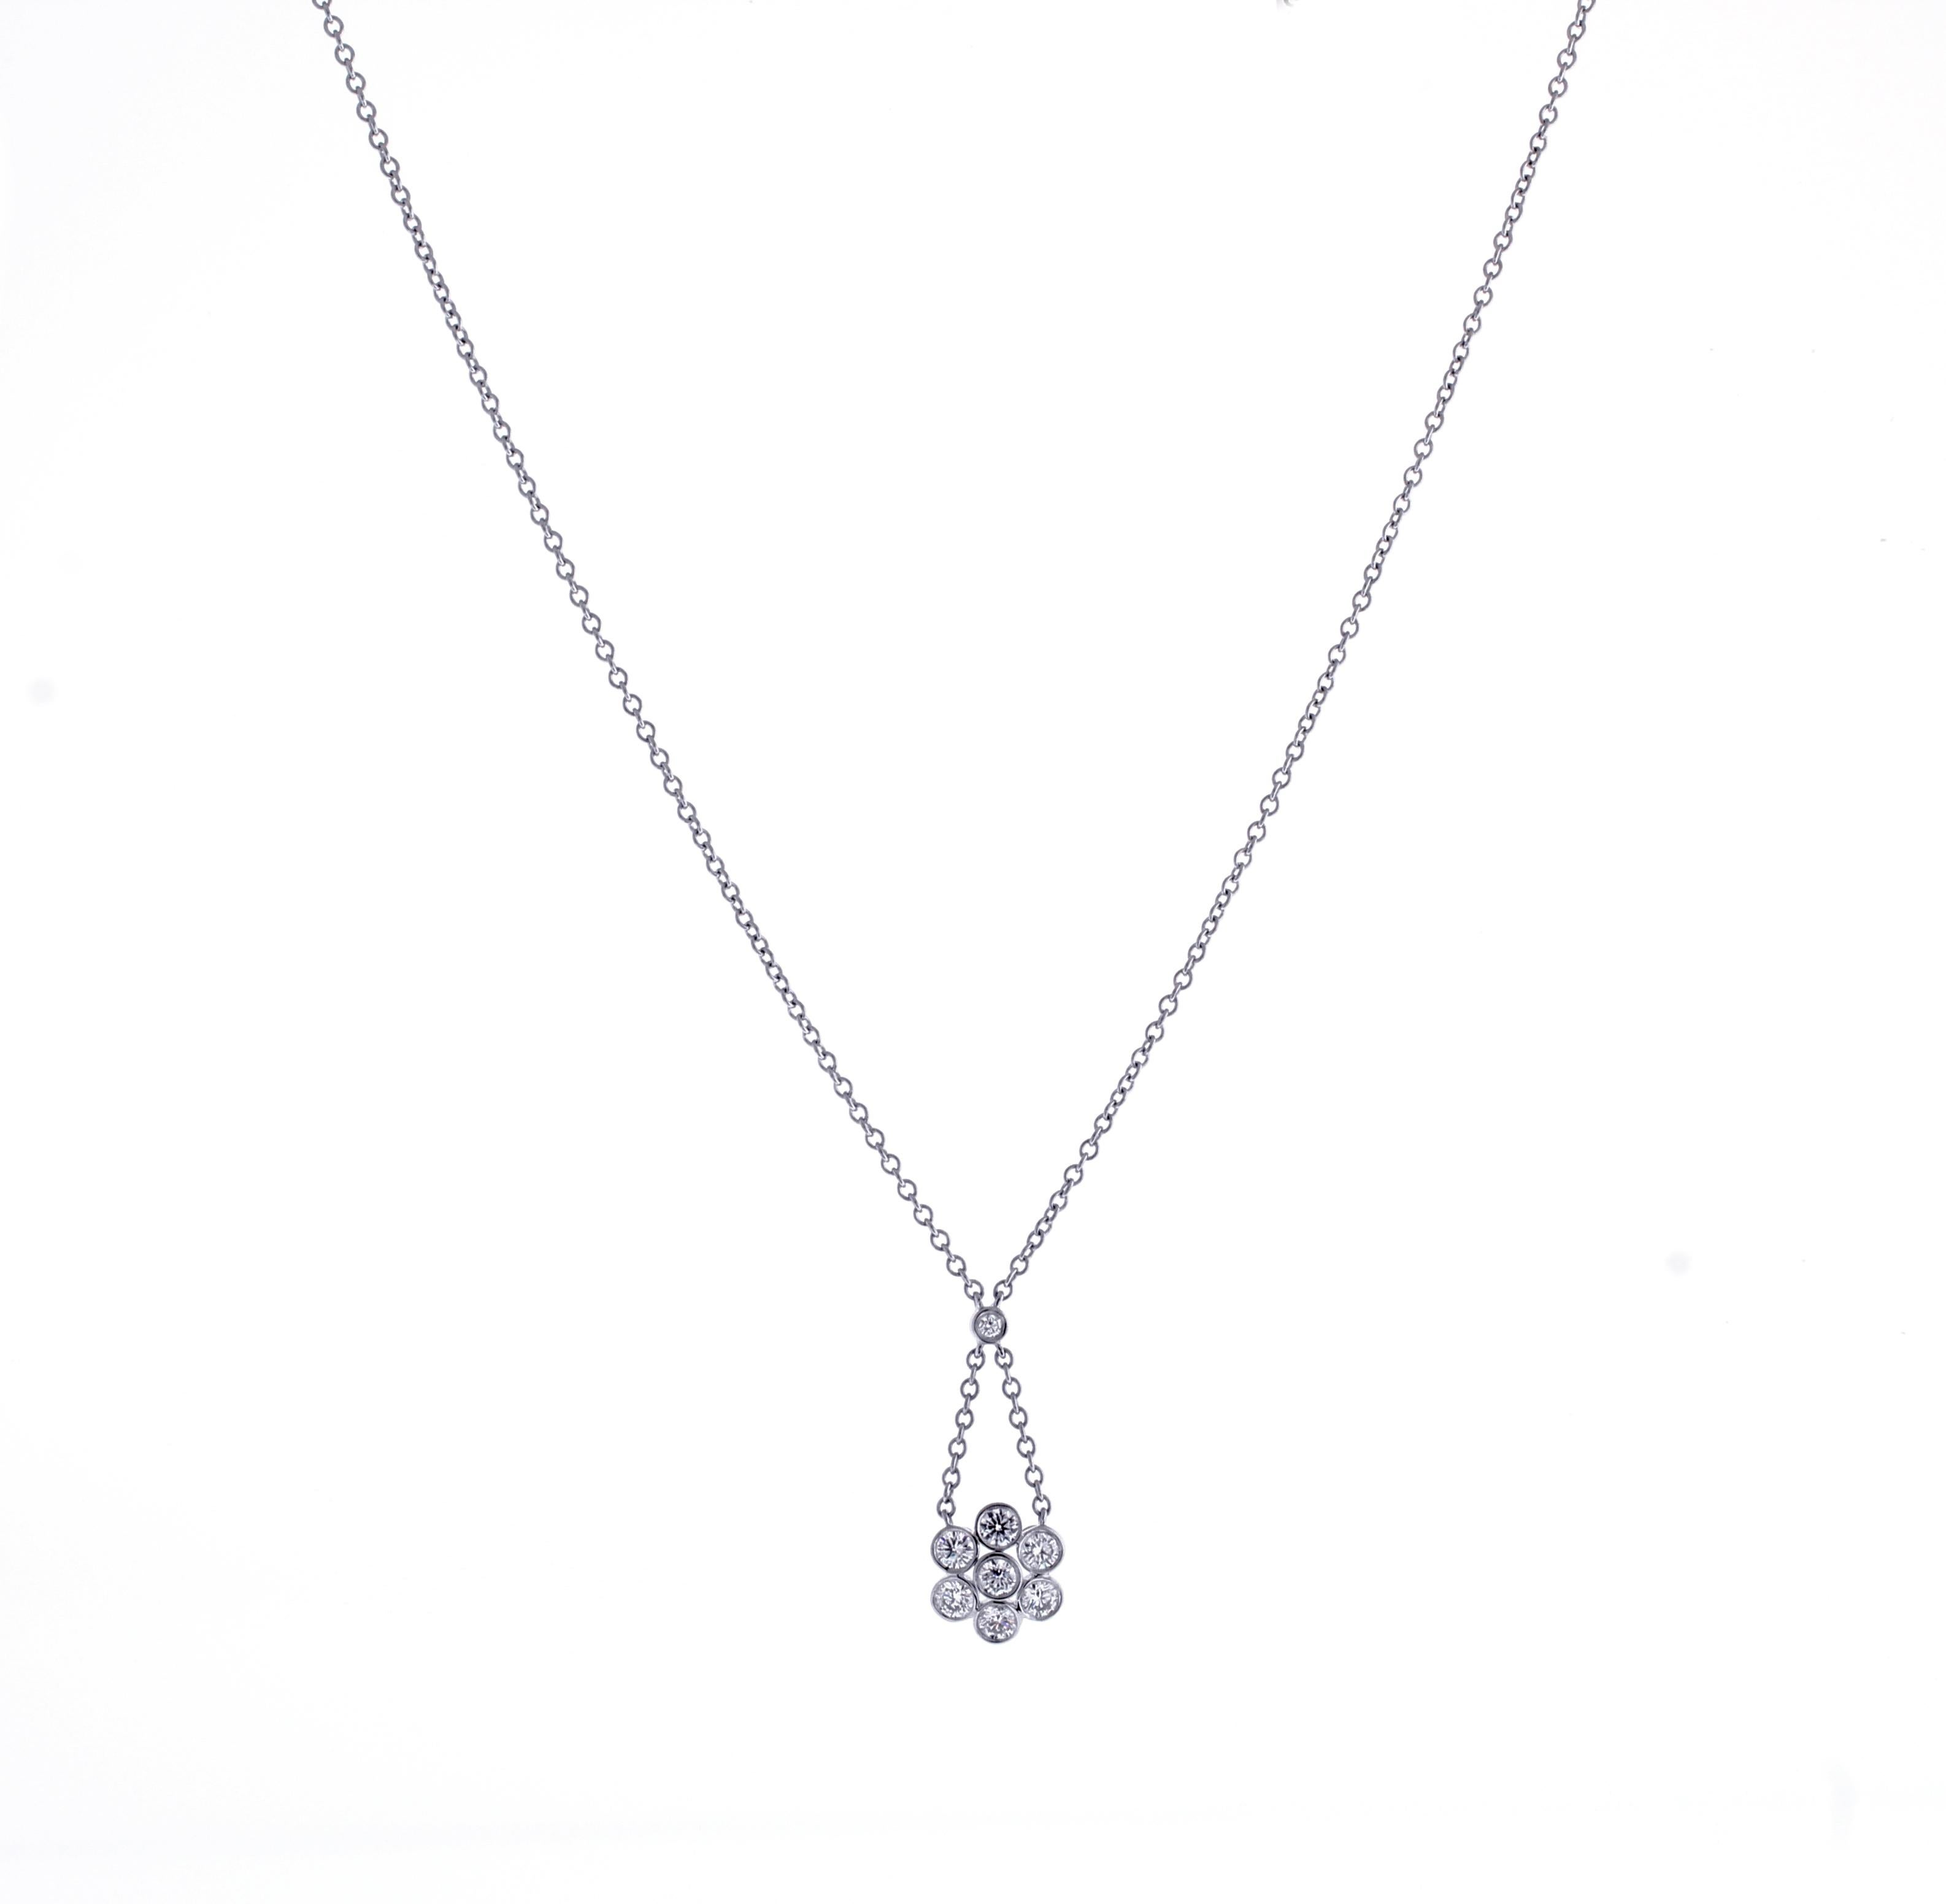 From the Tiffany & Co., enchant collection, their diamond cluster pendant necklace.
♦ Designer: Tiffany & co.
♦ Metal: Platinum
♦ 8 Diamond =.86
♦ Circa 2015
♦ Size 16 inch necklace
♦ Packaging: Tiffany box
♦ Condition: Excellent , pre-owned
♦